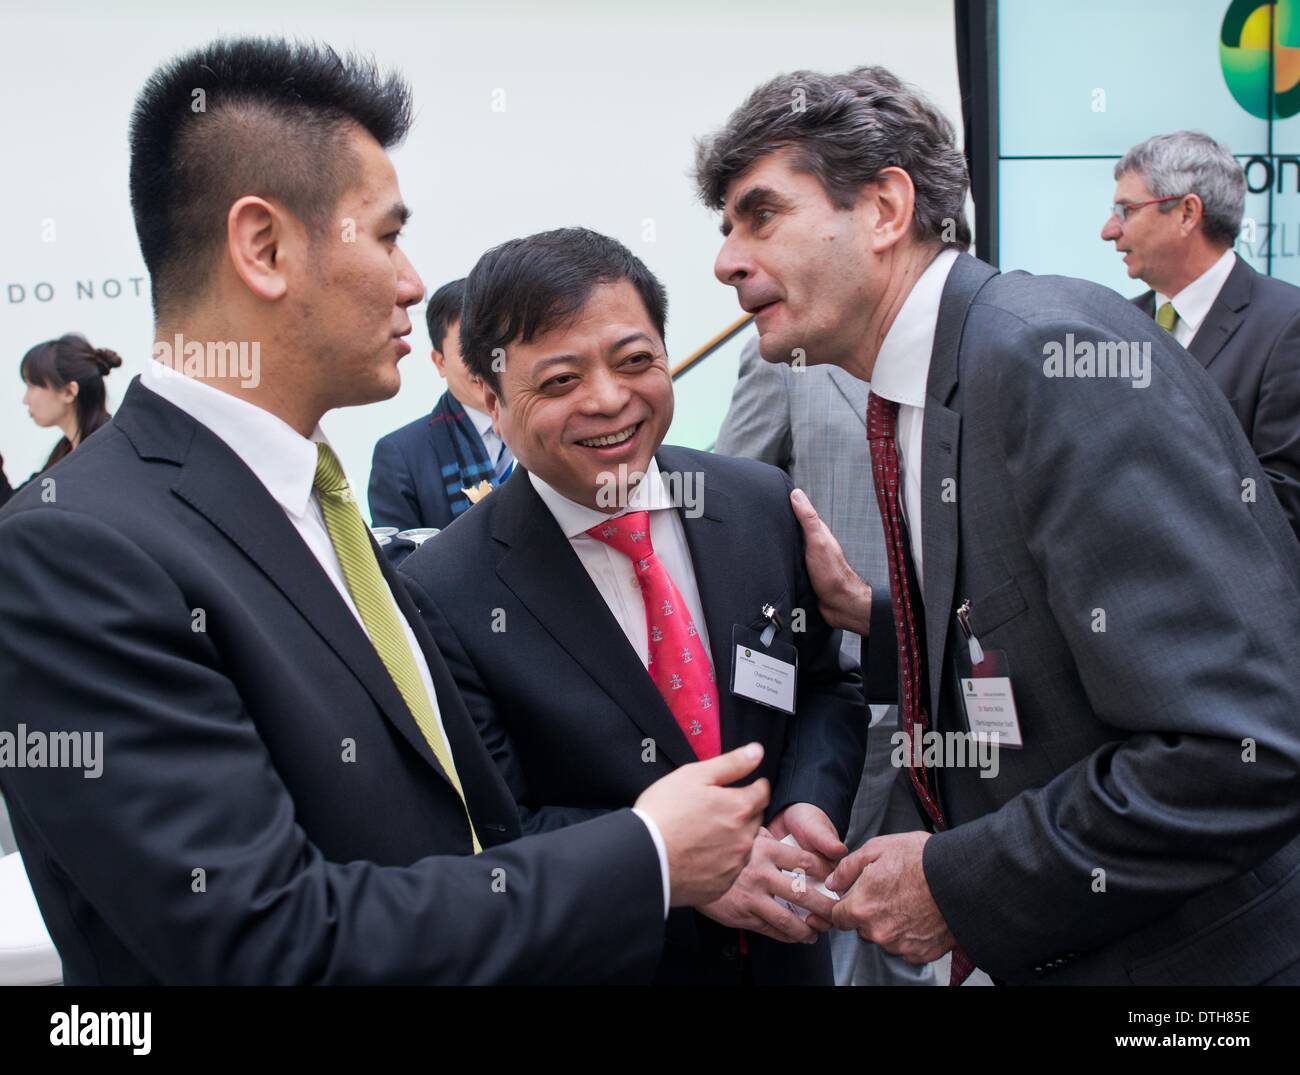 (L-R) Vice President of Chin Group Chuan Lu, Chint Group Manager Cunhui Nan and mayor Martin Wilke (non-party) talk to each other at the opening of the solar plant of the Astronergy Solarmodule GmbH company in Frankfurt Oder, Germany, 18 February 2014. The new Chinese owner presented his plans for the plant on the same day. The Astronergy Solarmodule GmbH took over the module factory of insolvent solar company Conergy in early 2014. About 200 jobs are supposed to be saved at the location. Astronergy is part of the worldwide operating Chint Group. Photo: Patrick Pleul/ZB Stock Photo